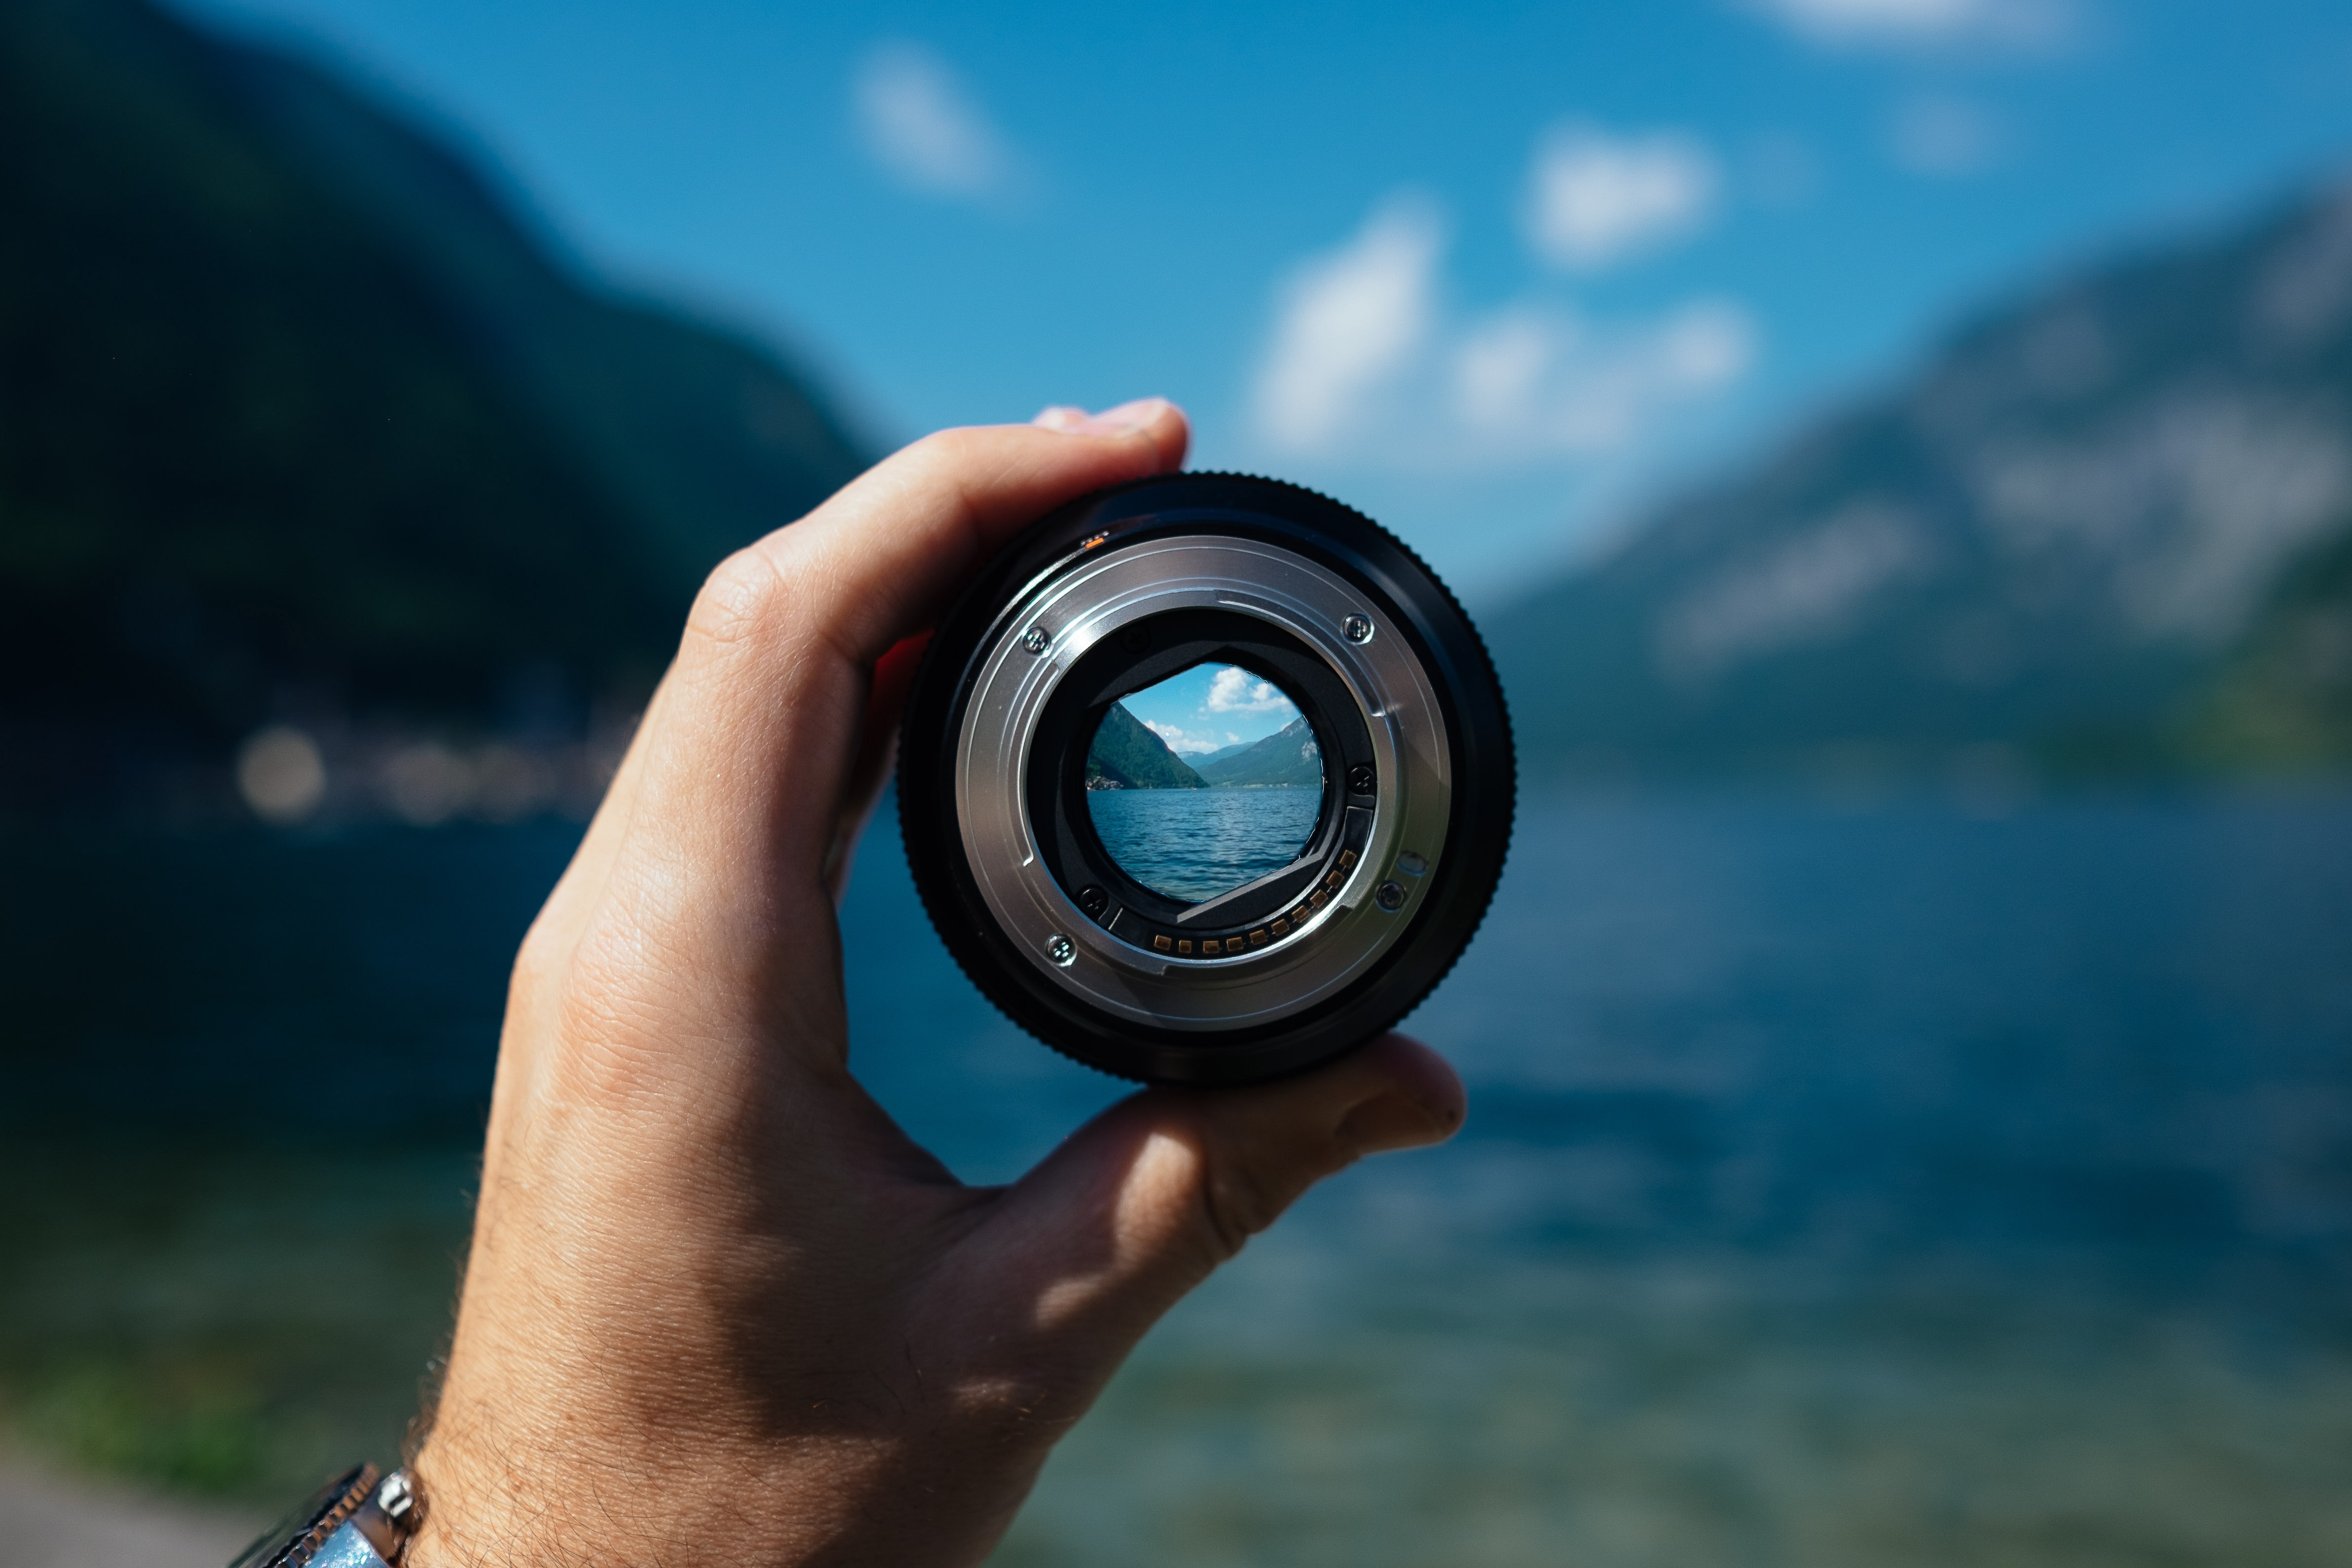 Seeing things in a new lens can be extremely beneficial, even when it's unexpected.